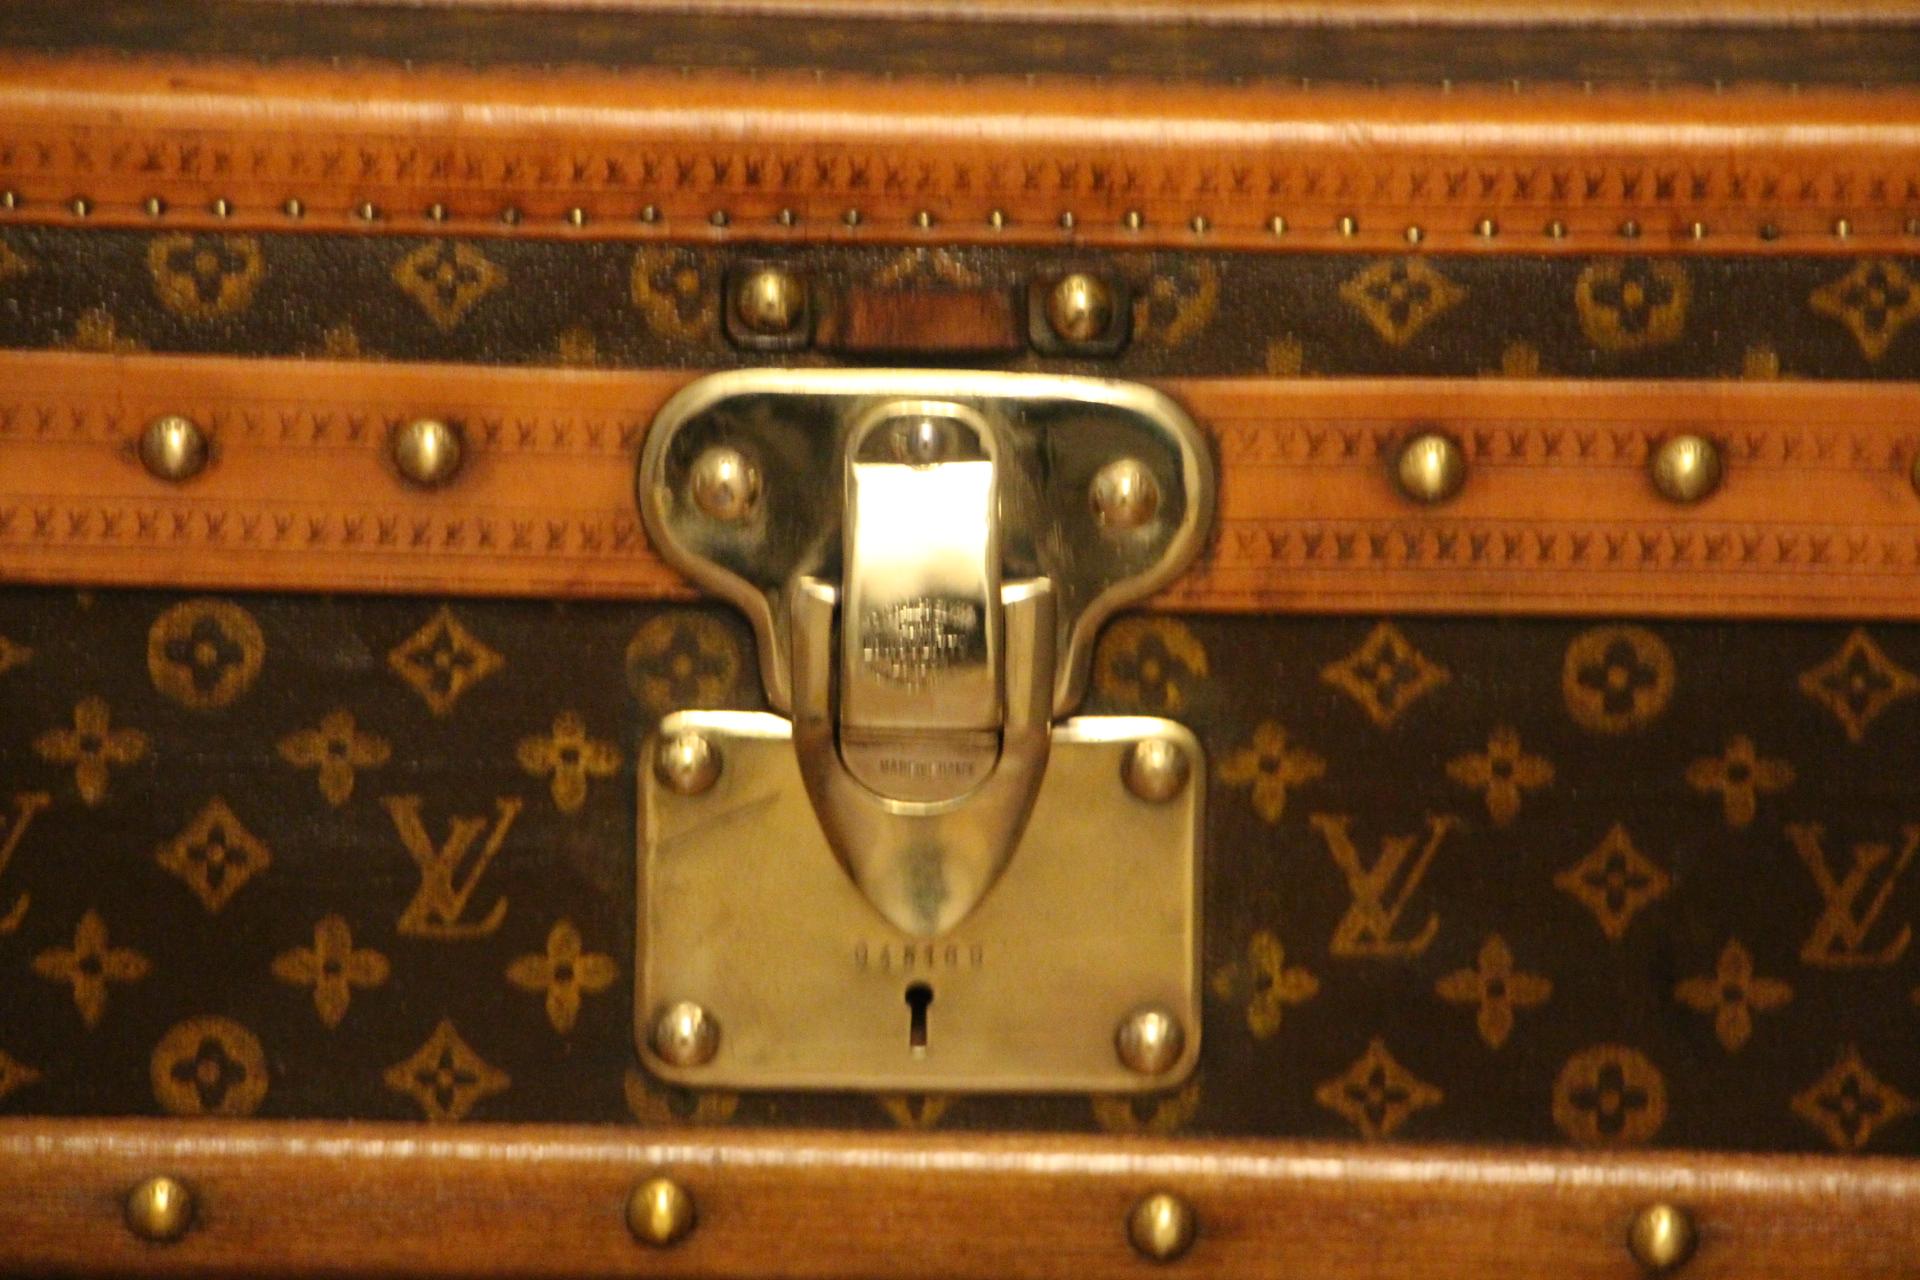 This superb Louis Vuitton steamer trunk features stenciled monogram canvas, lozine trim, LV stamped solid brass locks and studs as well as leather side handles and brass corners. It has got a beautiful original patina and is very elegant.
Its